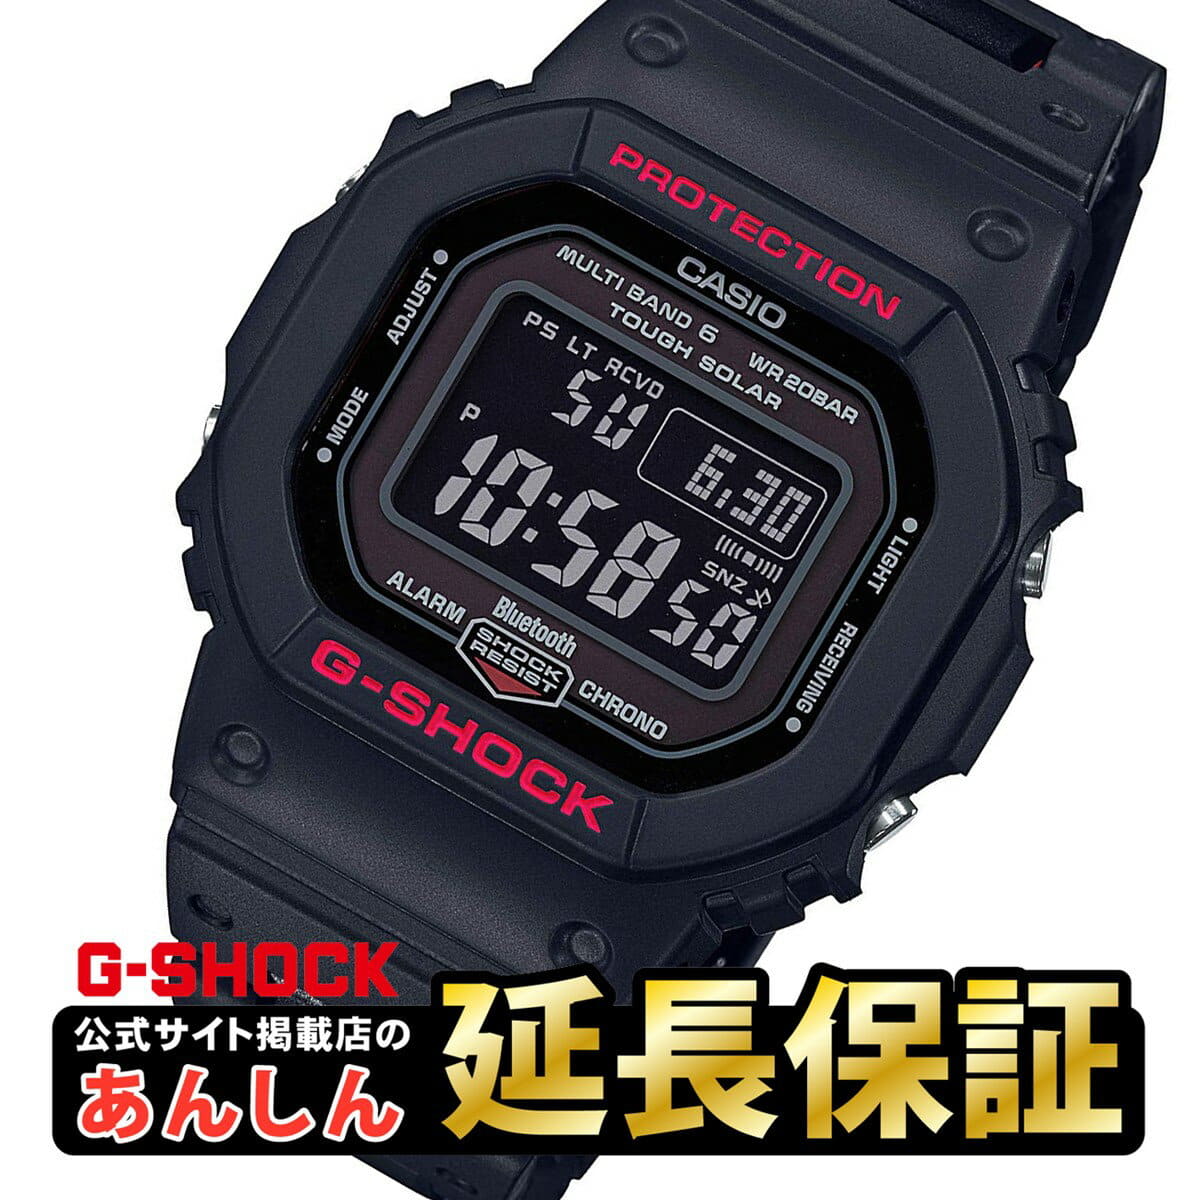 New Casio G Shock Gw B5600hr 1jf Smartphone Link Model Connected Electric Wave Solar Radio Time Signal Watch Men Composite Band Casio G Shock Origin 5600 Series 0219 From 00 On July 4 Be Forward